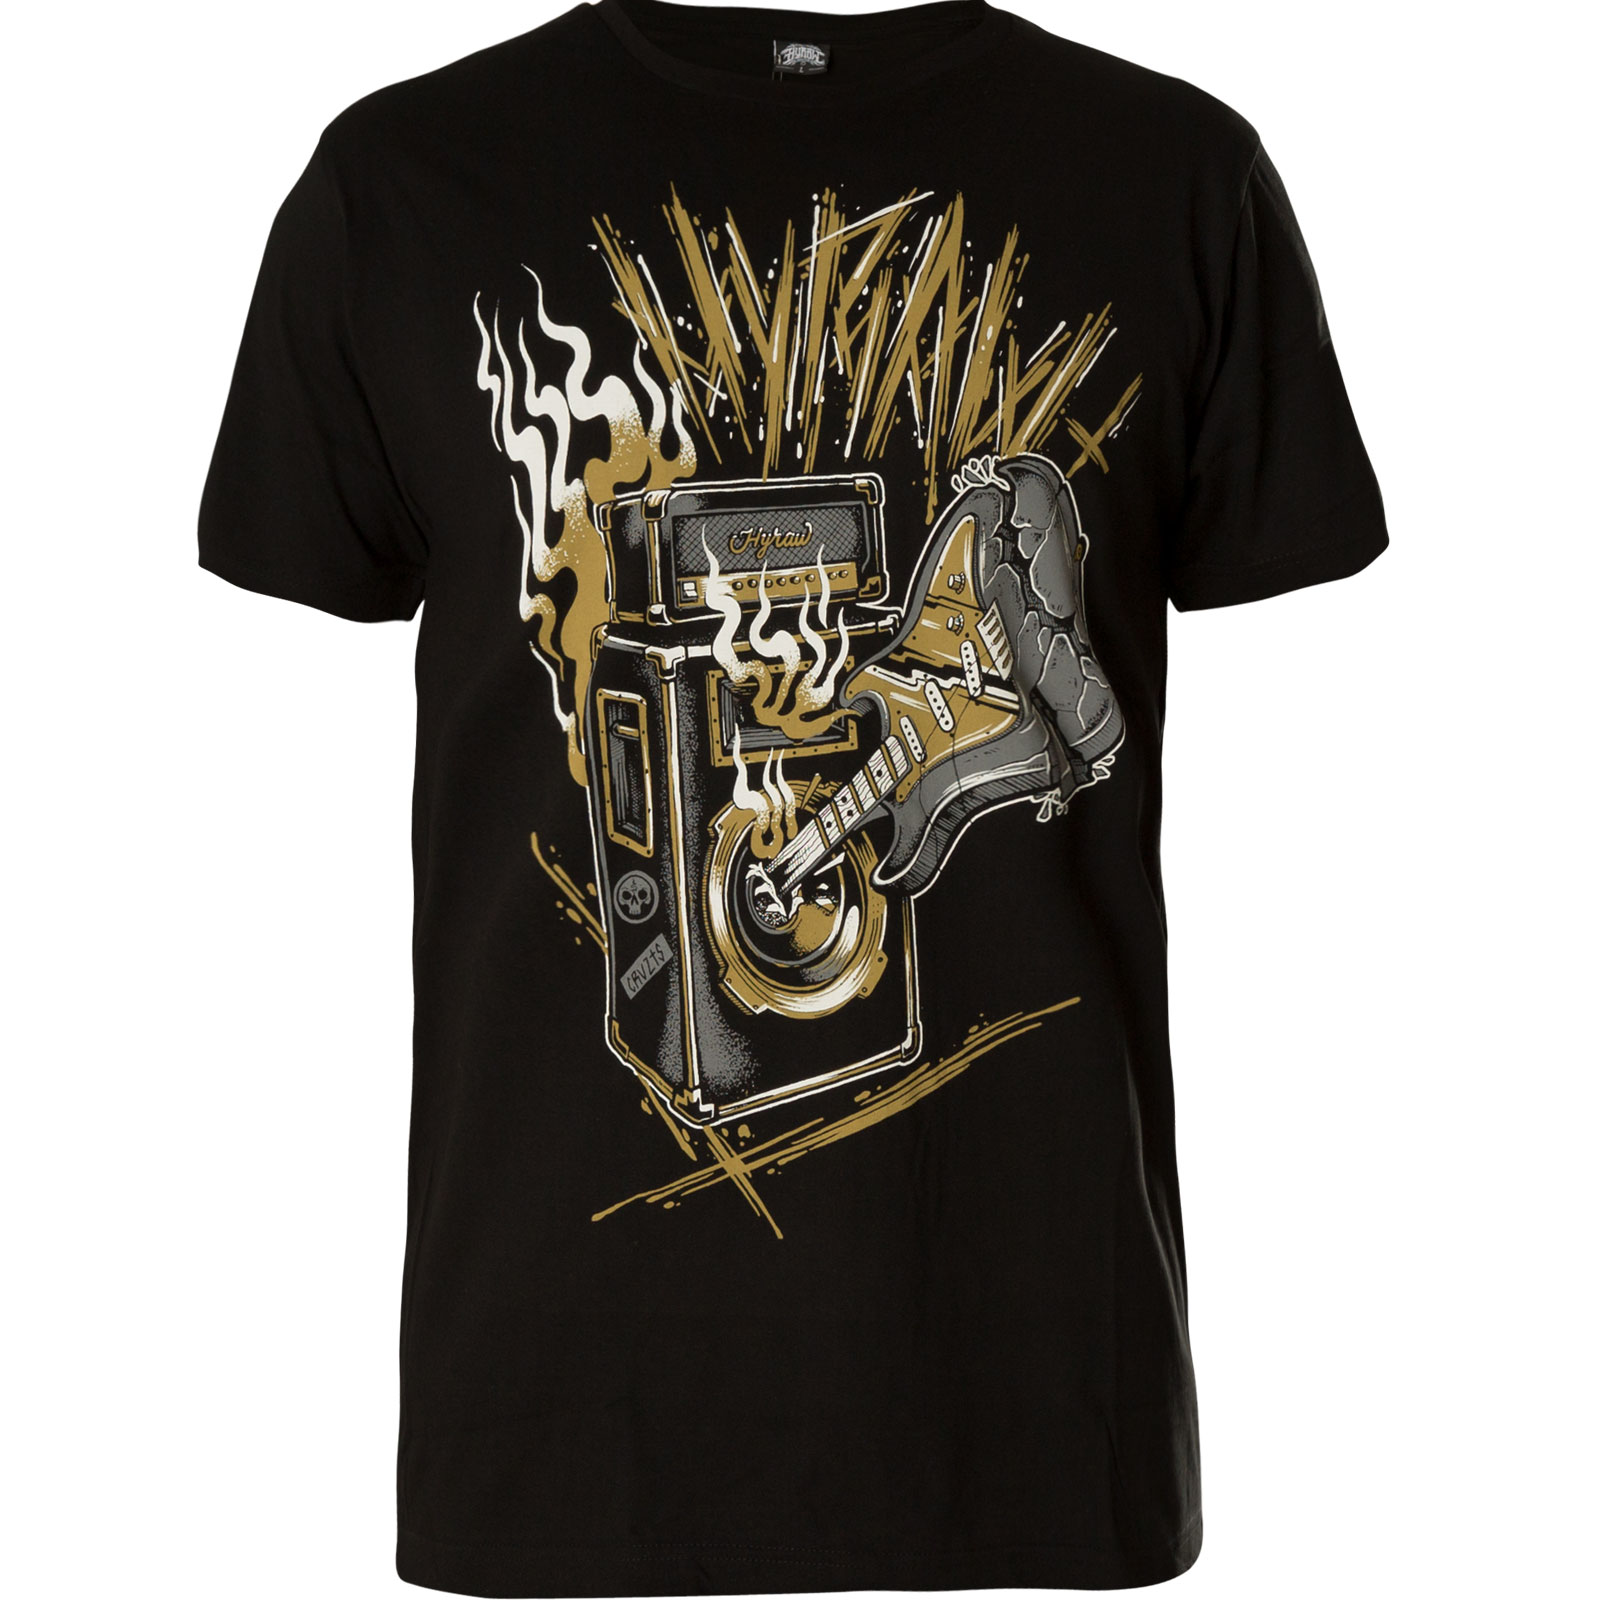 Hyraw T-Shirt Destroy in black Print of a guitar and a box